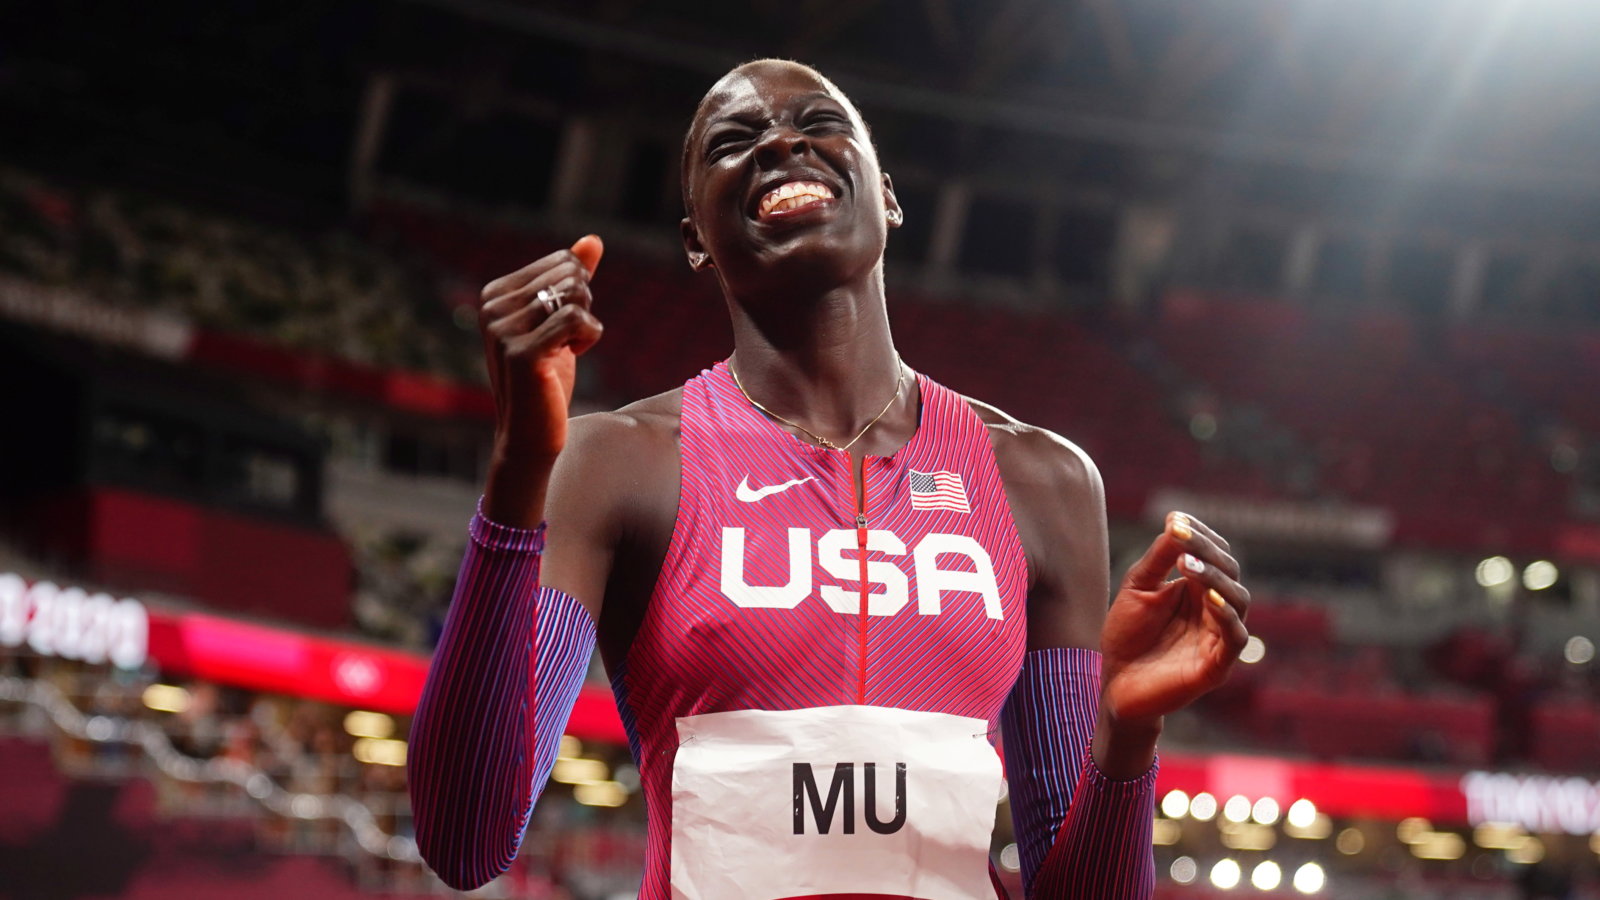 Olympics Athing Mu ends long American wait for women’s 800m gold